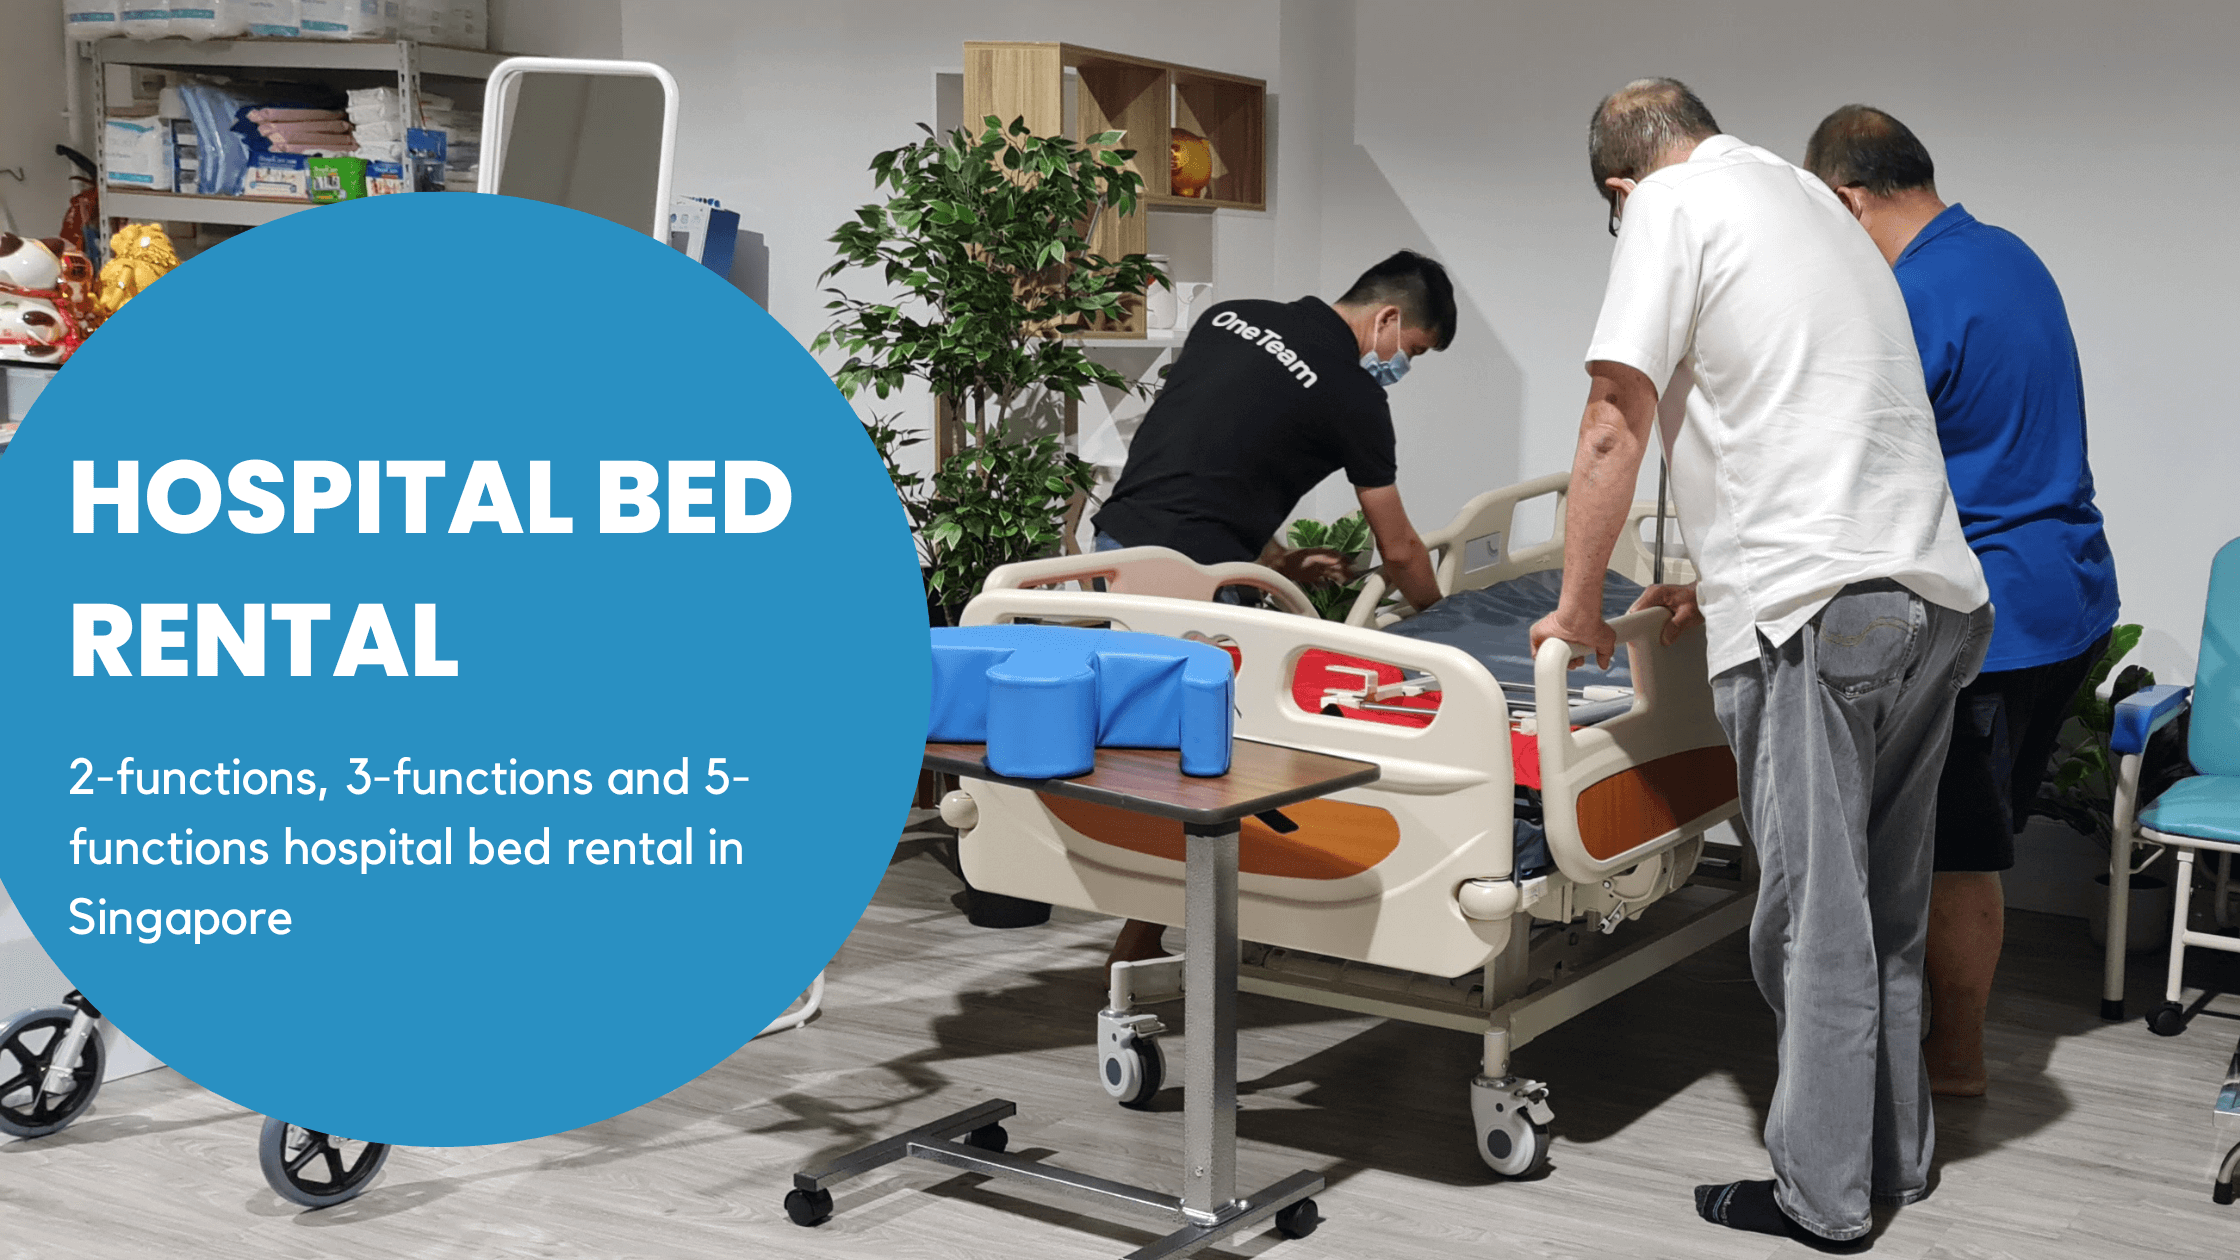 Hospital bed rental in Singapore